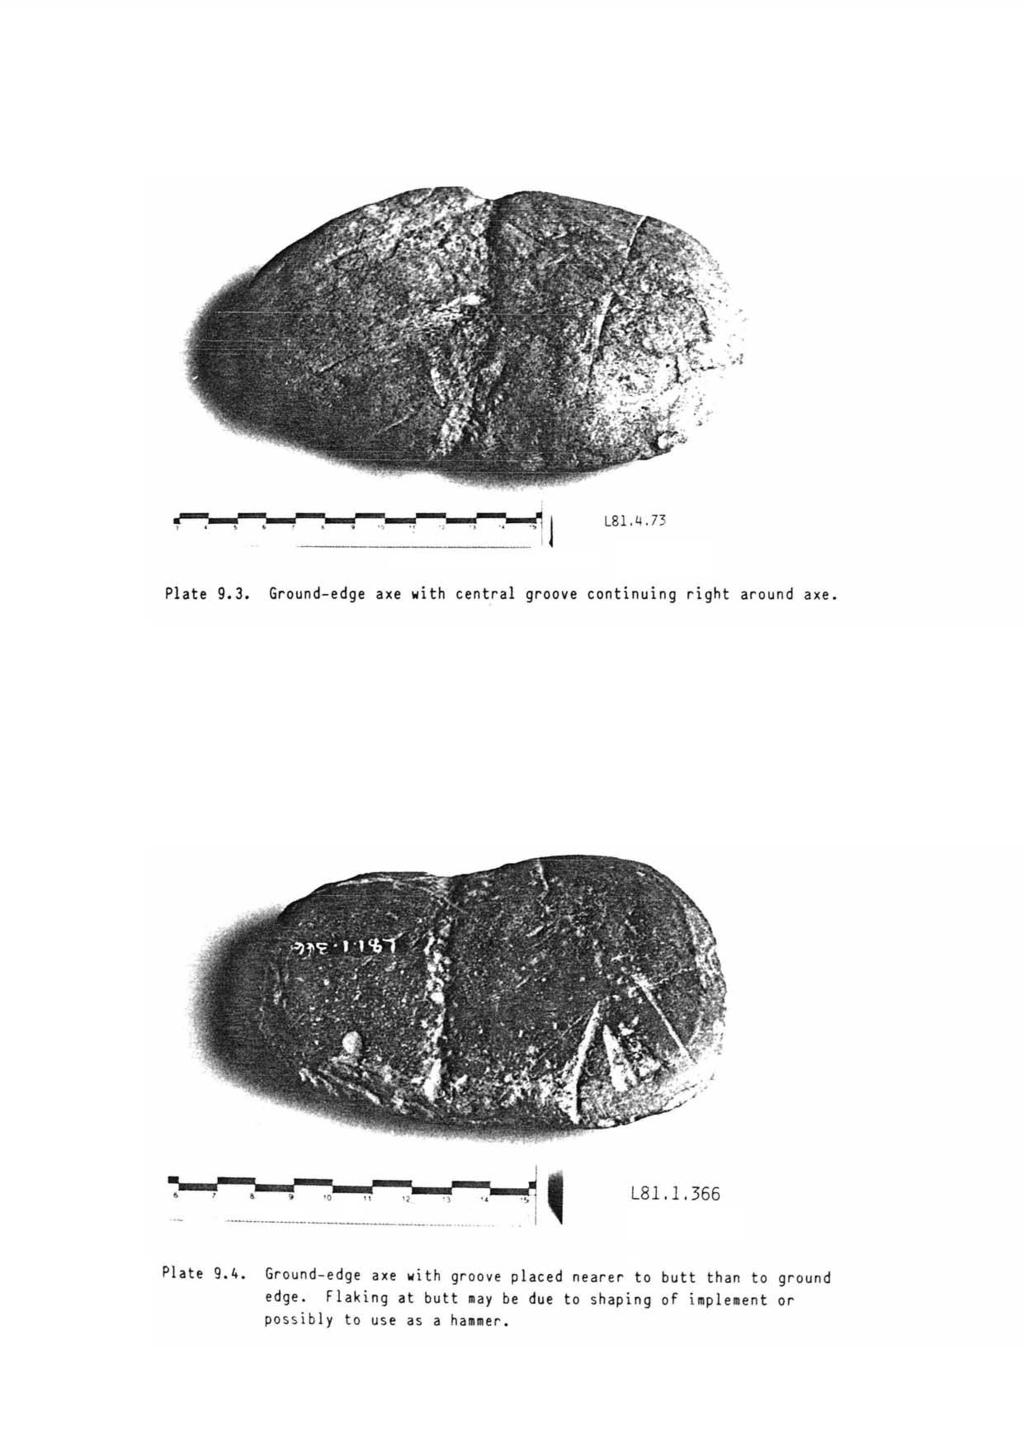 L81.4. 73 l Plate 9.3. Grund-edge axe with central grve cntinuing right arund axe. - ------------------ "' L81.1.366 Plate 9.4. Grund-edge axe with grve placed nearer t butt than t grund edge.